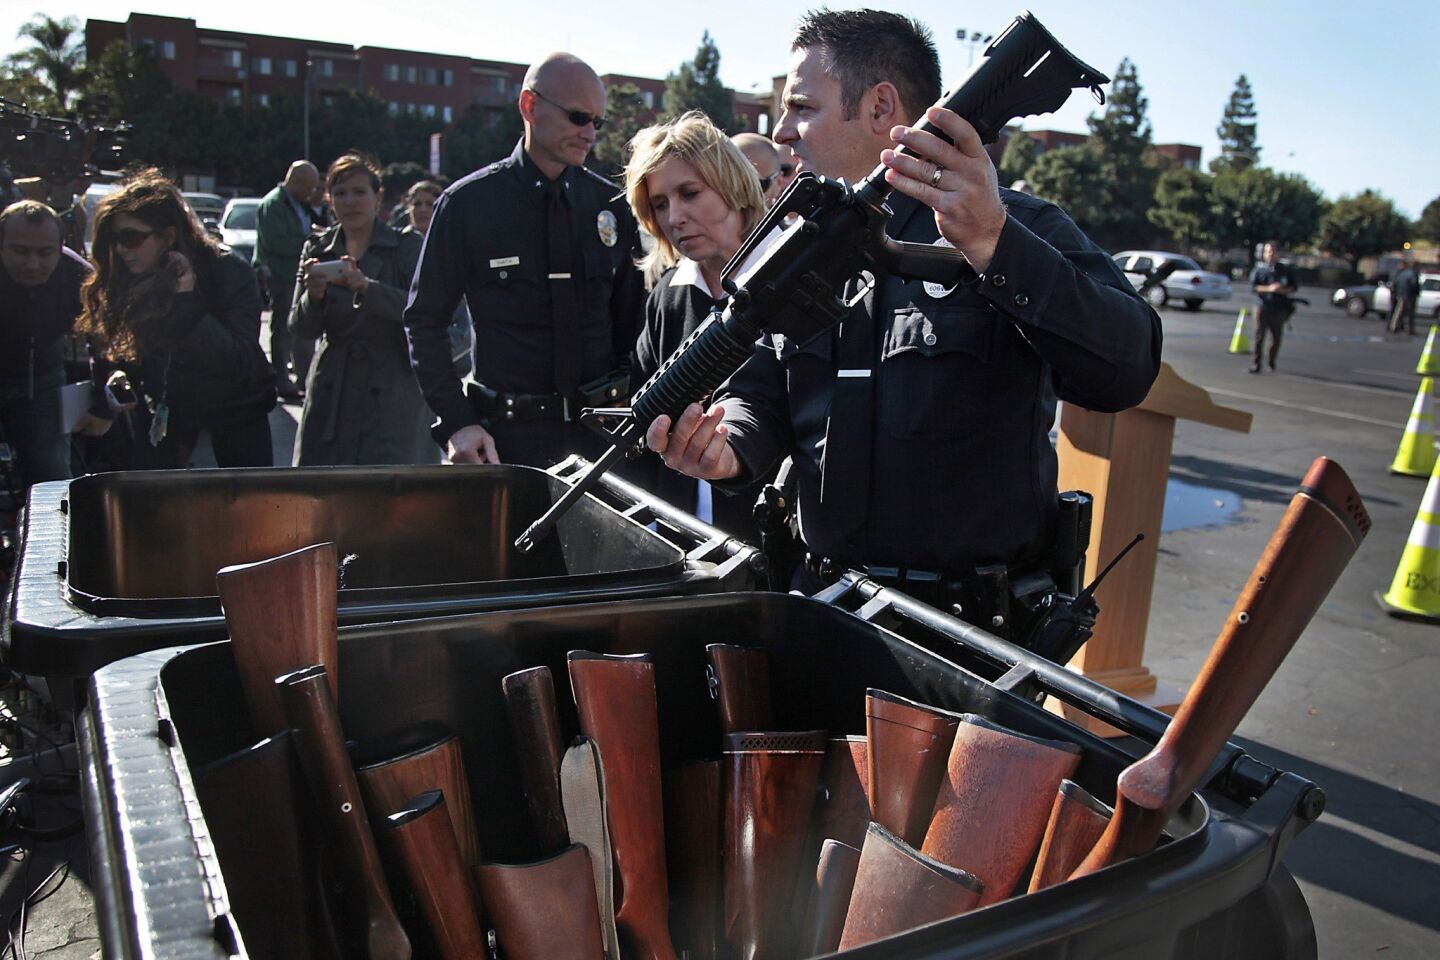 LAPD reserve officer Joe Buscaino, who is also a Los Angeles city council member, holds an assault weapon that was turned in.